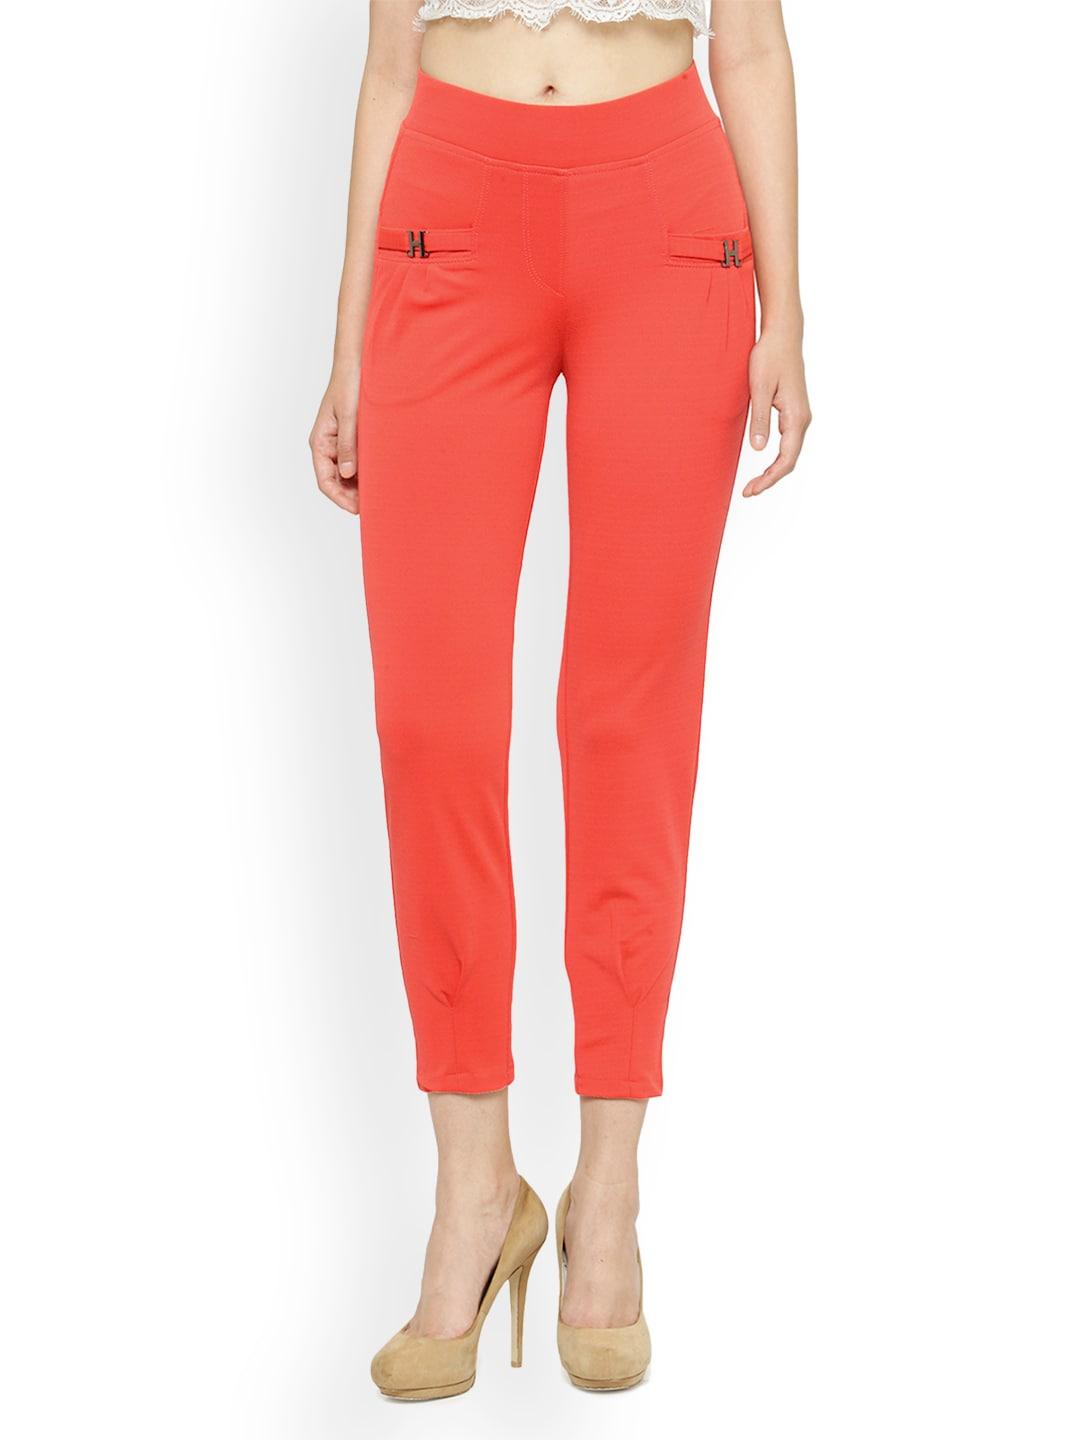 Westwood Coral Red Jeggings